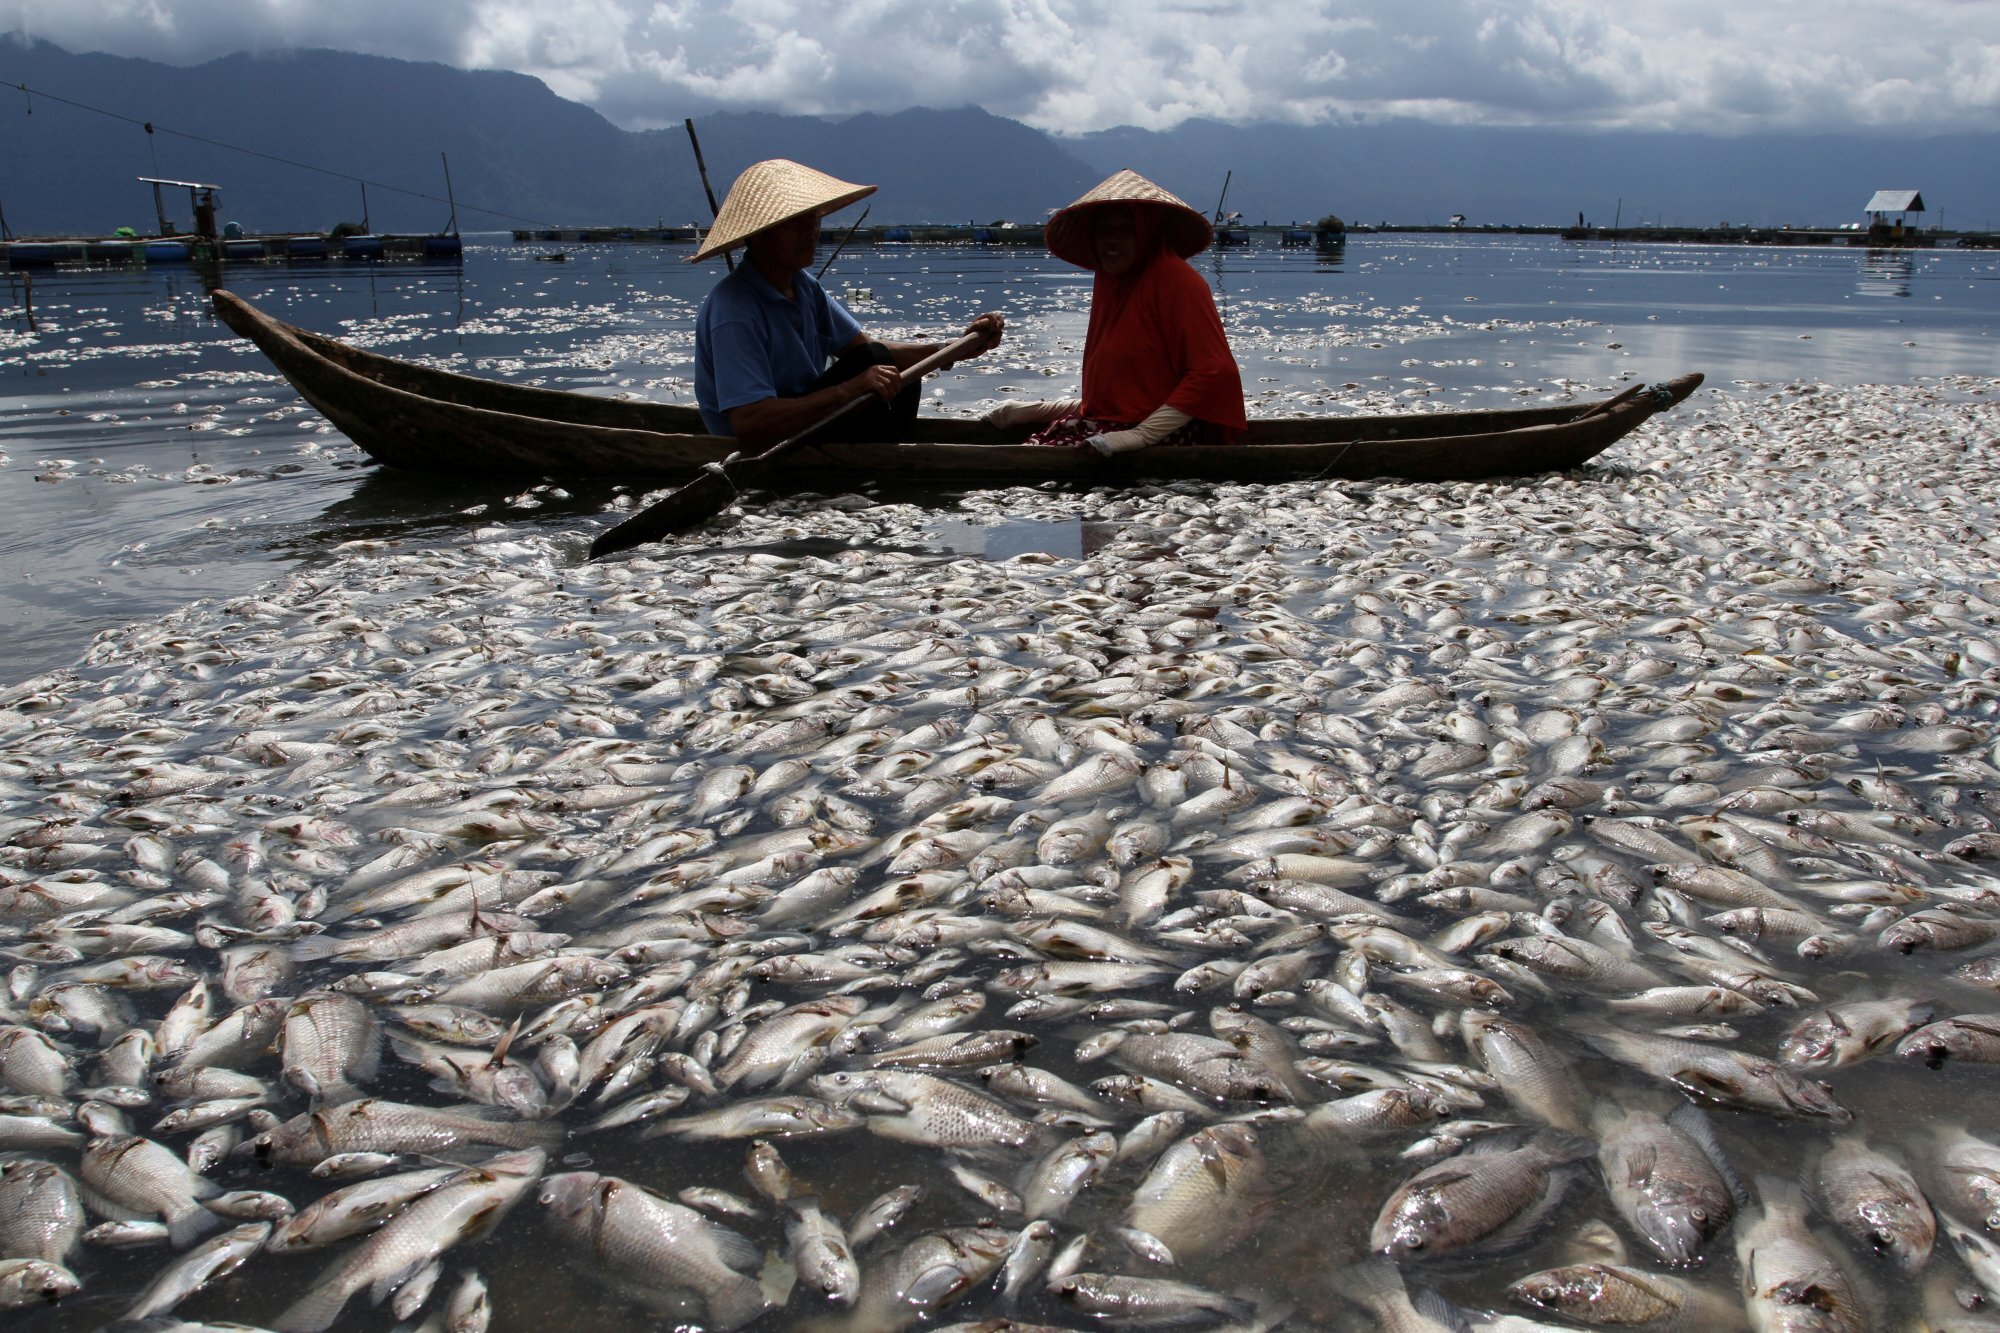 Unavailability of Fish in the course of the Kyauk Phyu River along with  Scarcity of Fishing Zones for Near-Shore Fishing Boats - Development Media  Group